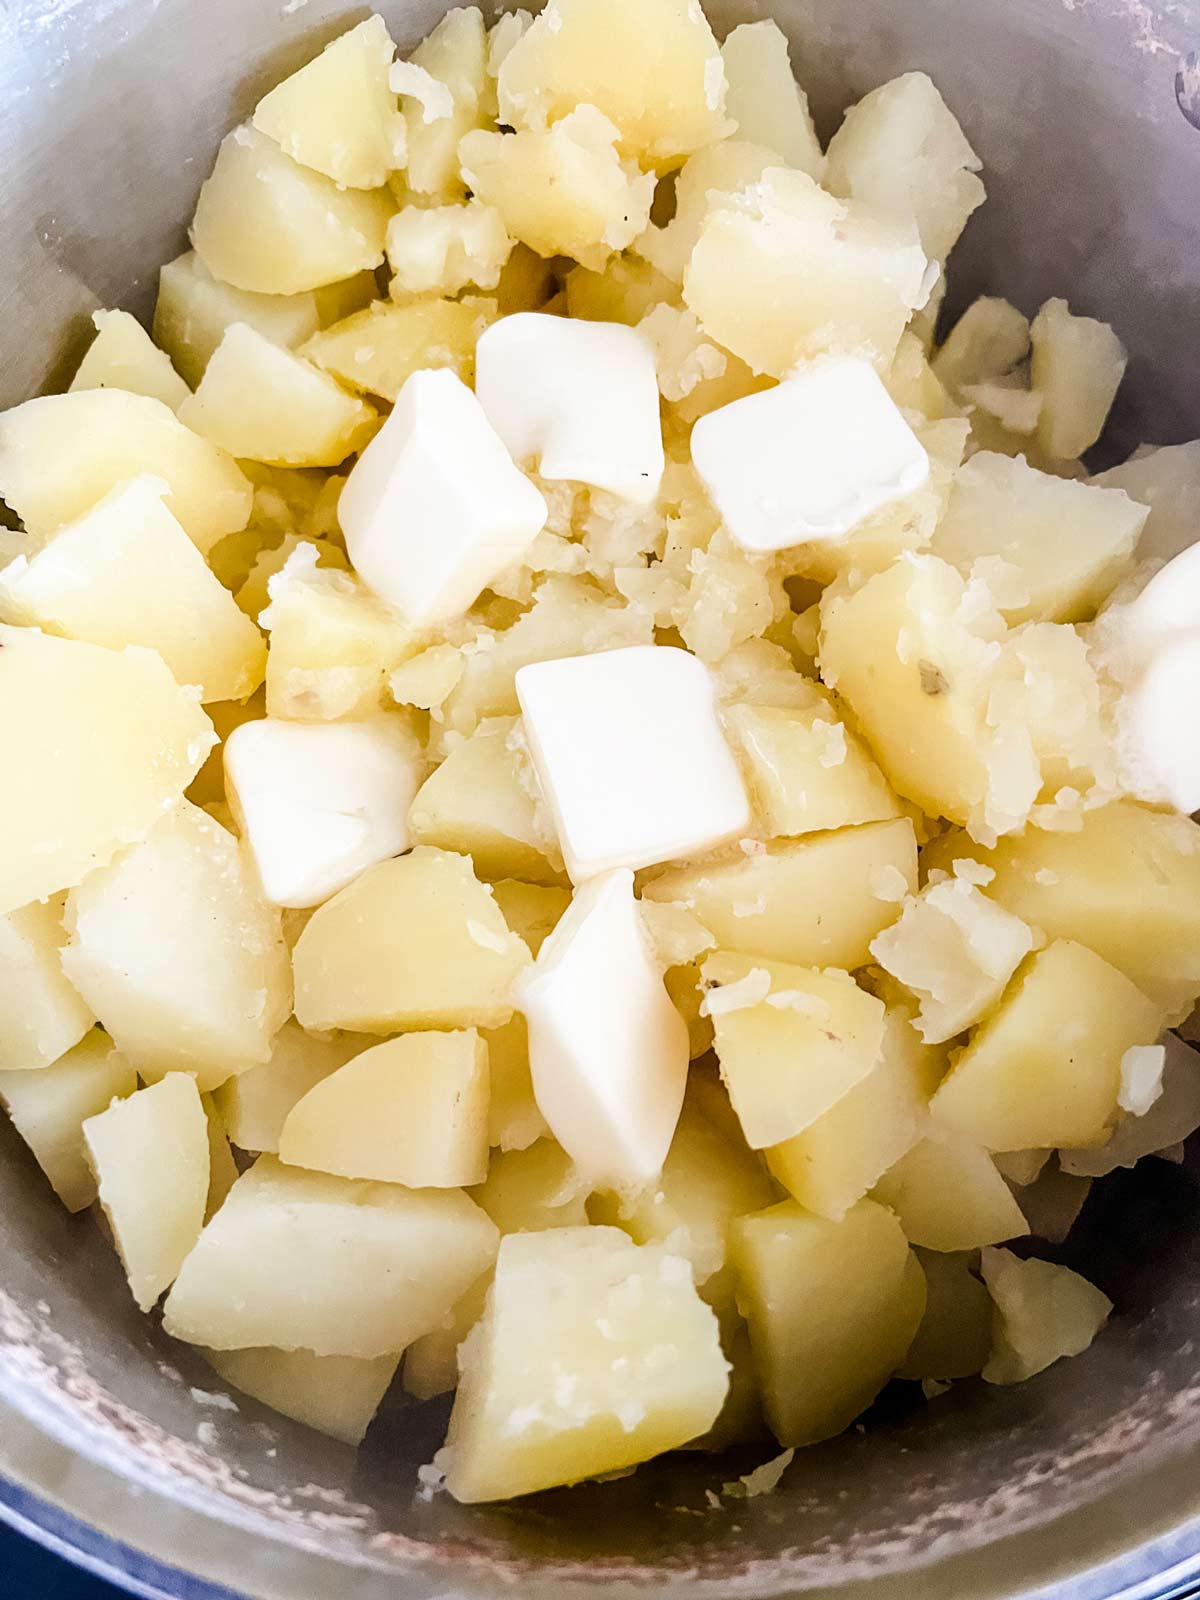 Cooked diced potatoes with butter on top.